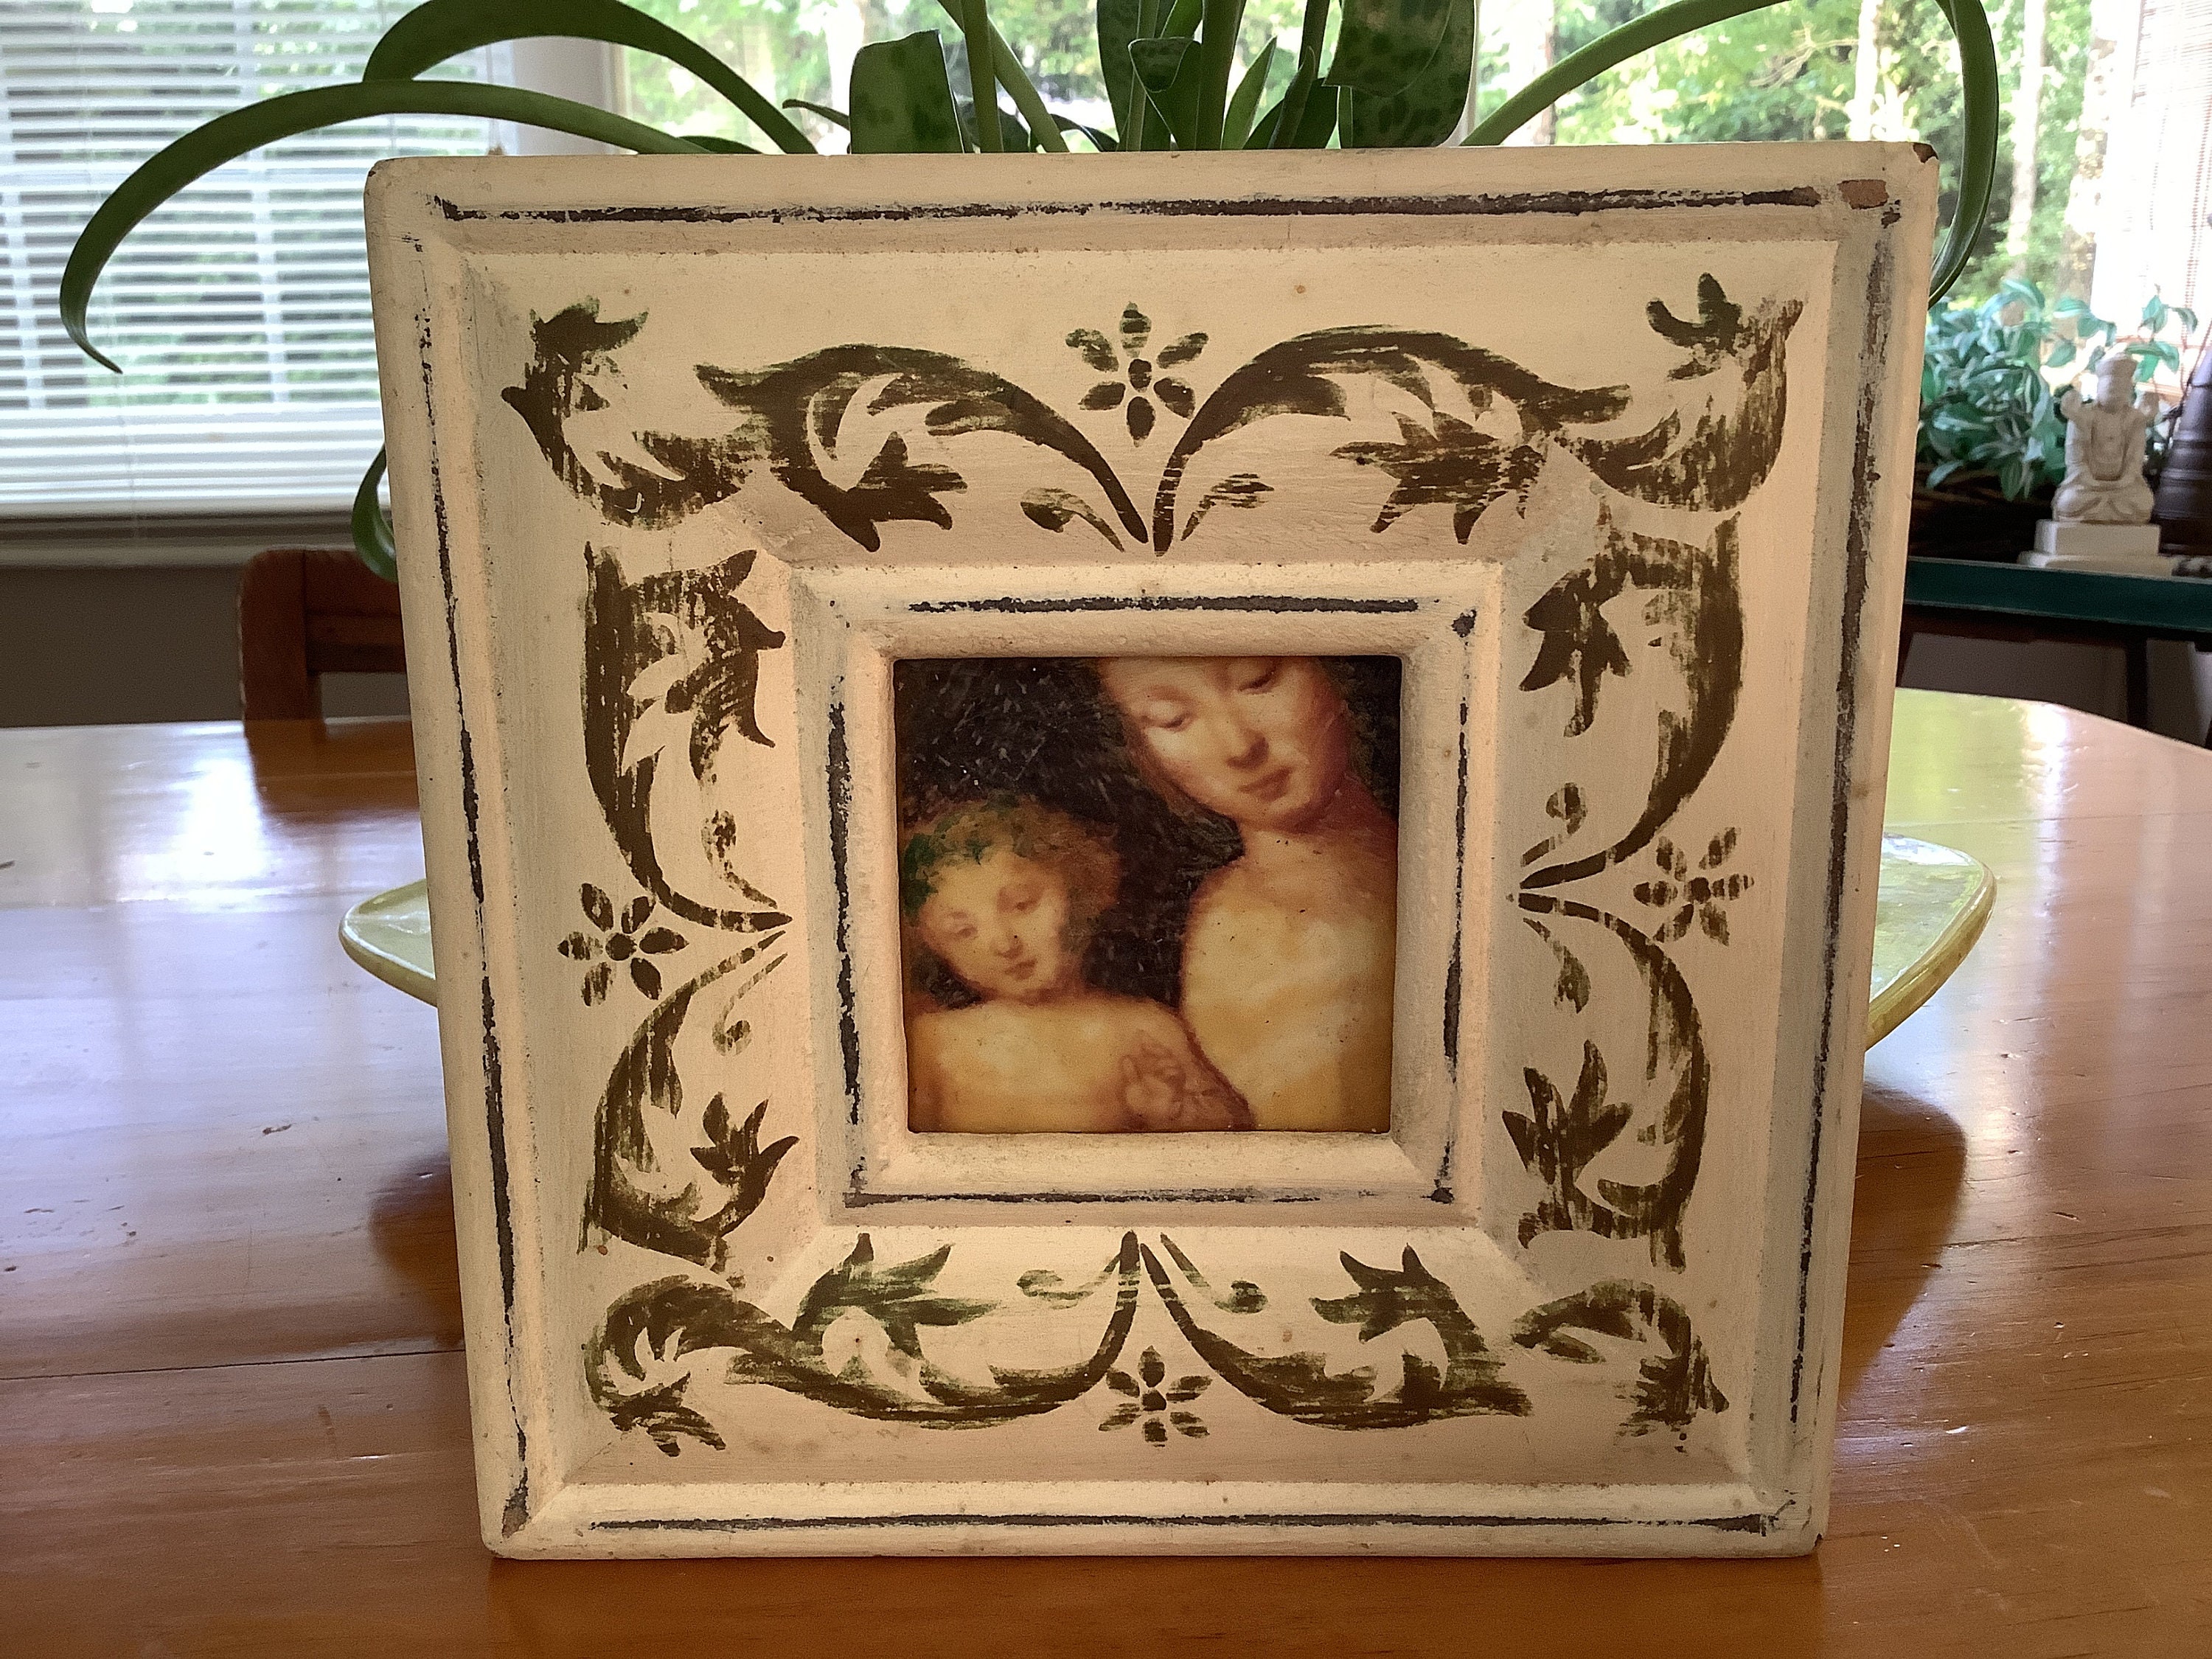 24x30 Matted Picture Frame With 28x34 Inch off White Wash on Ash Frame  Matted With 2 Inch Mat, Over 60 Mat Colors, 4098-24x30, Arttoframes 